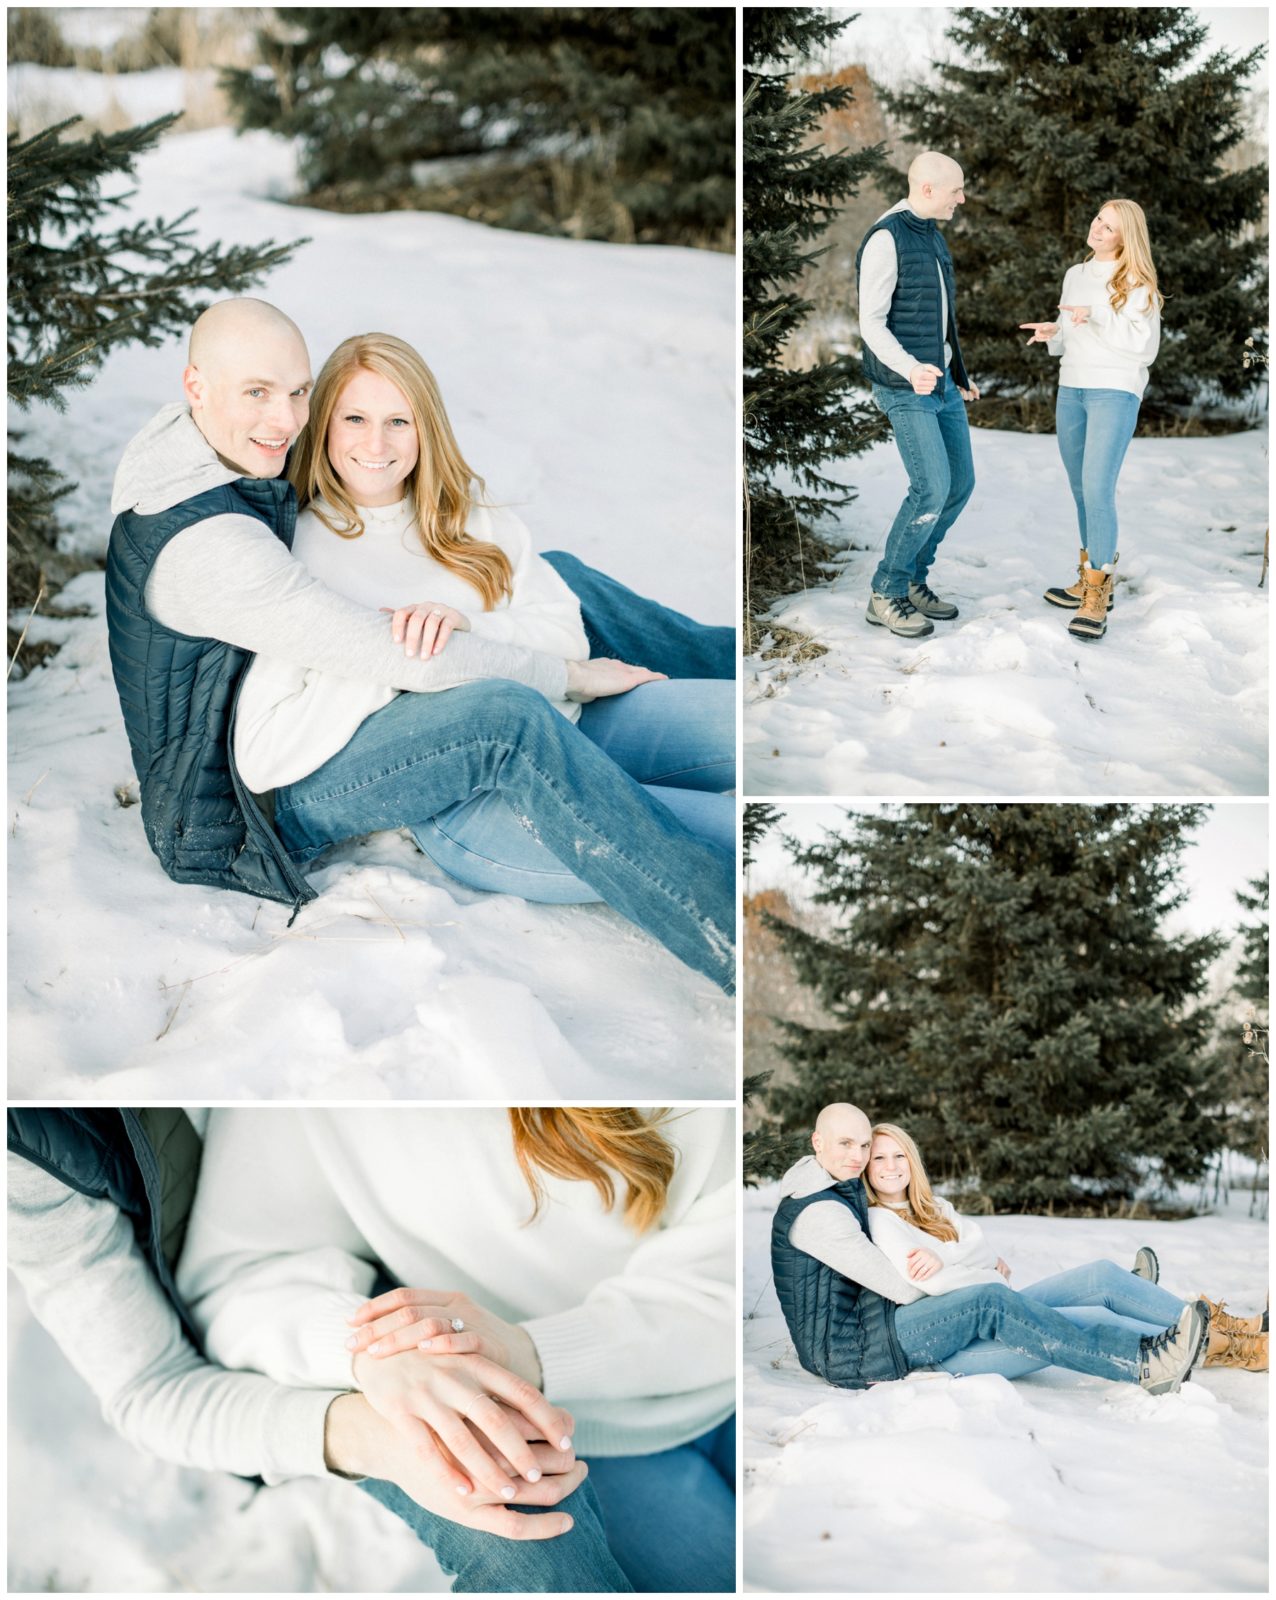 Pictures of a couple in the snow. They are smiling and showing affection towards each other.